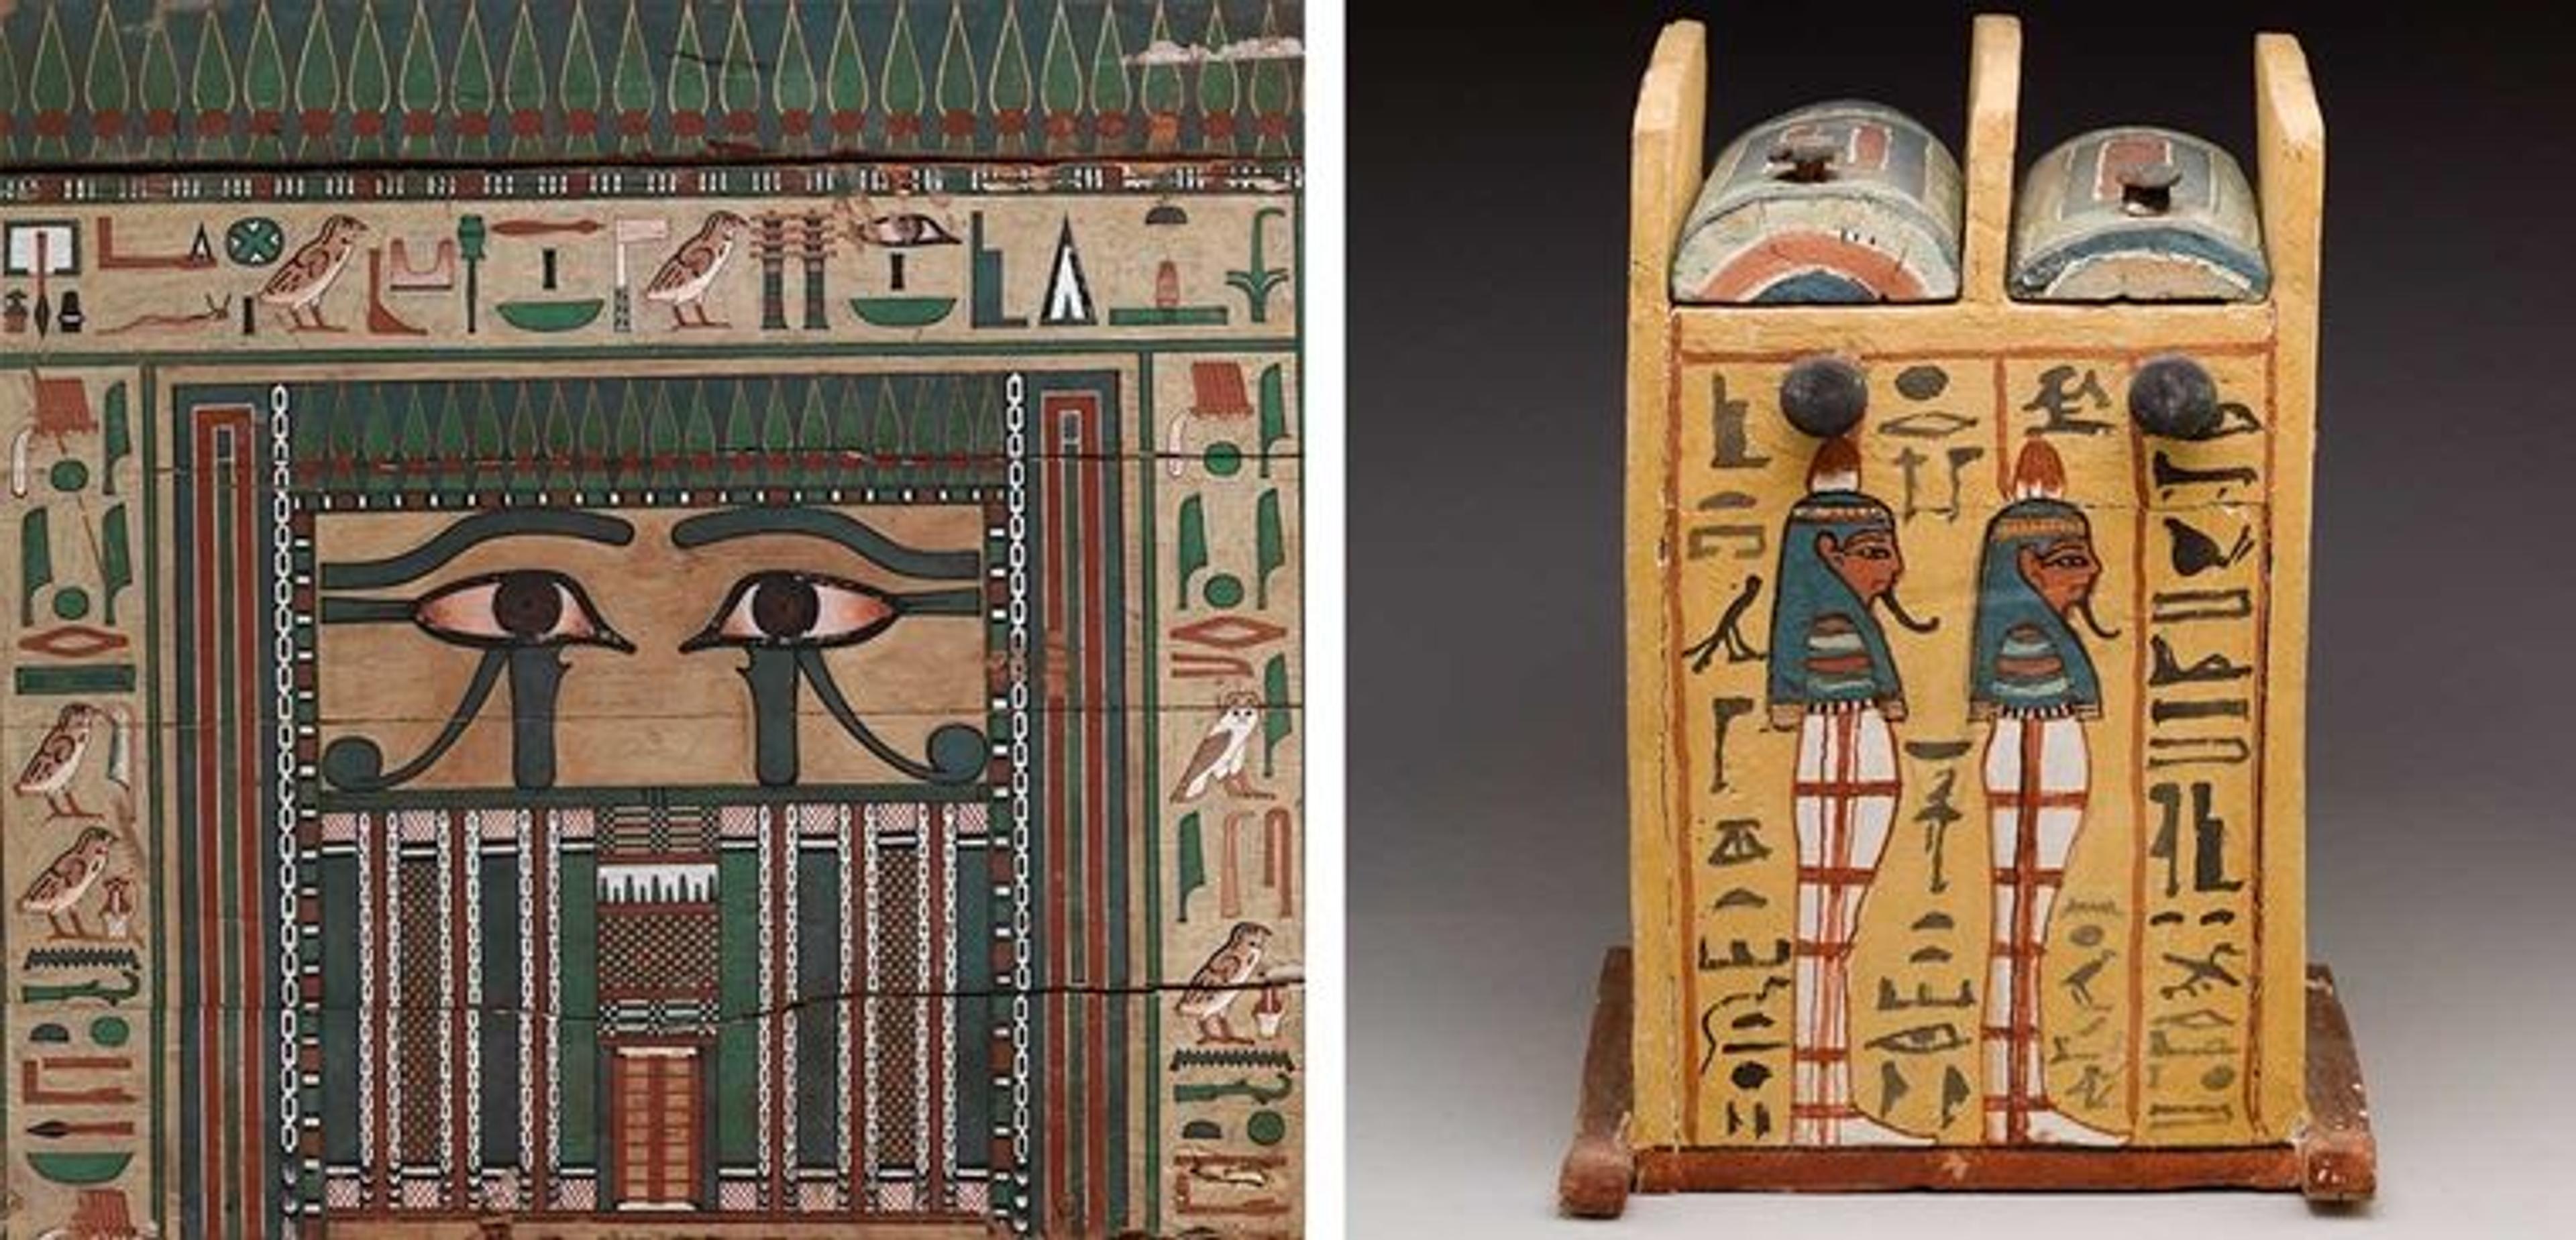 Left: a detail of a painting on an ancient Egyptian wooden coffin featuring eyes surrounded by ornate patterns and objects. Right: an ancient Egyptian box featuring a painting of two pharaohs facing to the right.